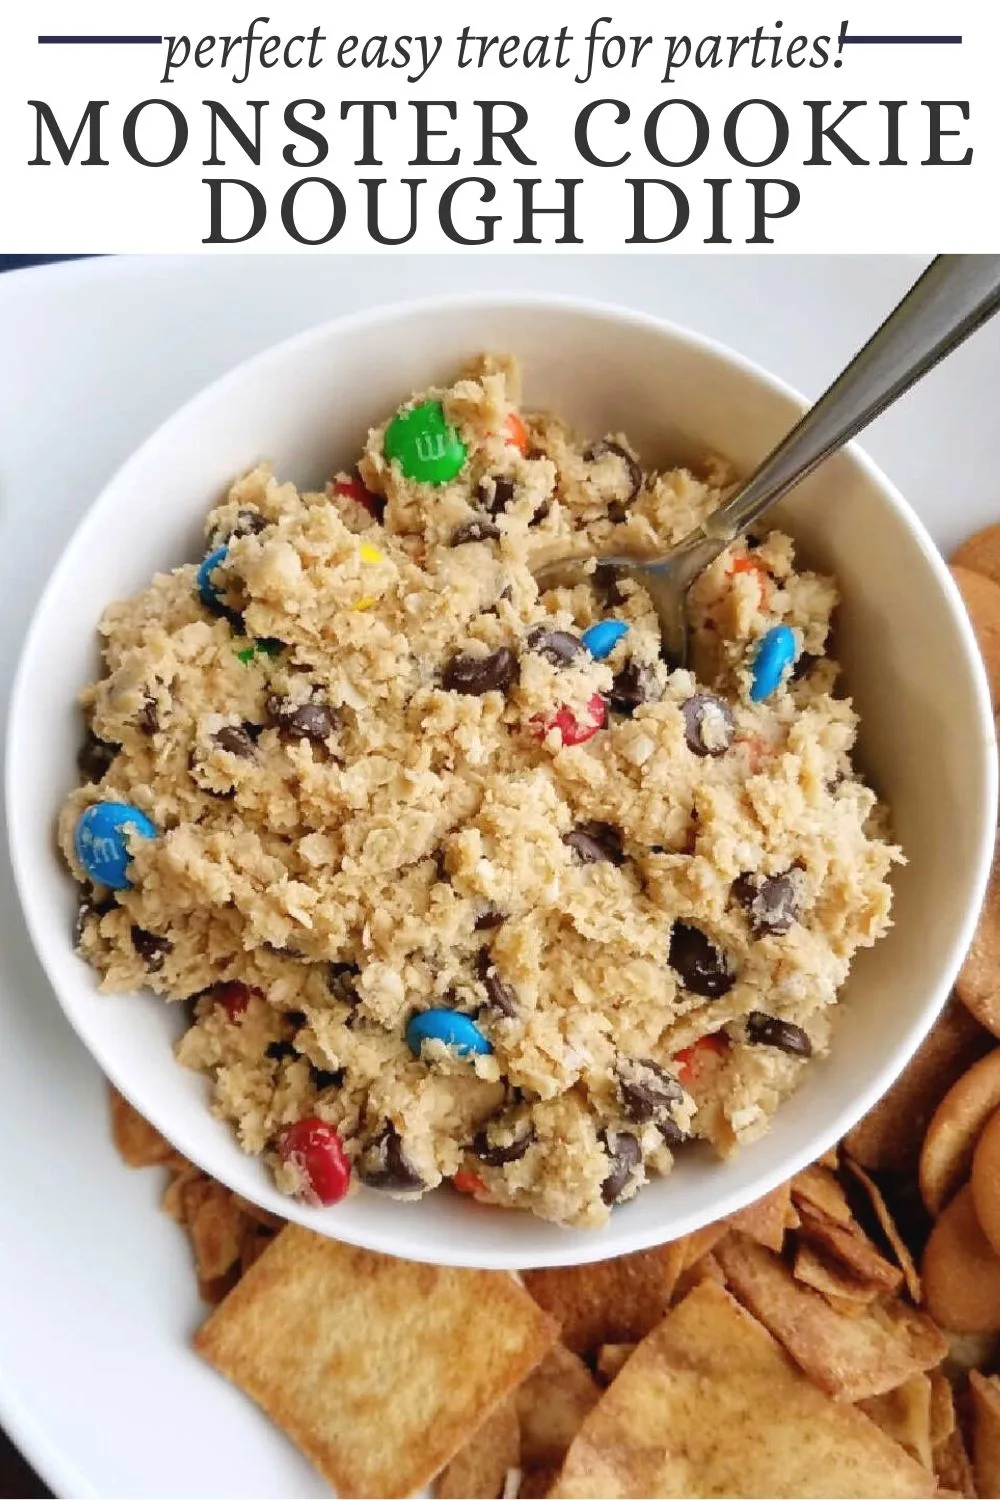 Monster cookie dough dip has all of the peanut butter, oats, and chocolate you love from the cookies, but in a fun dippable form. Use pretzels, graham crackers or apple slices to dig in and indulge your cookie dough cravings.